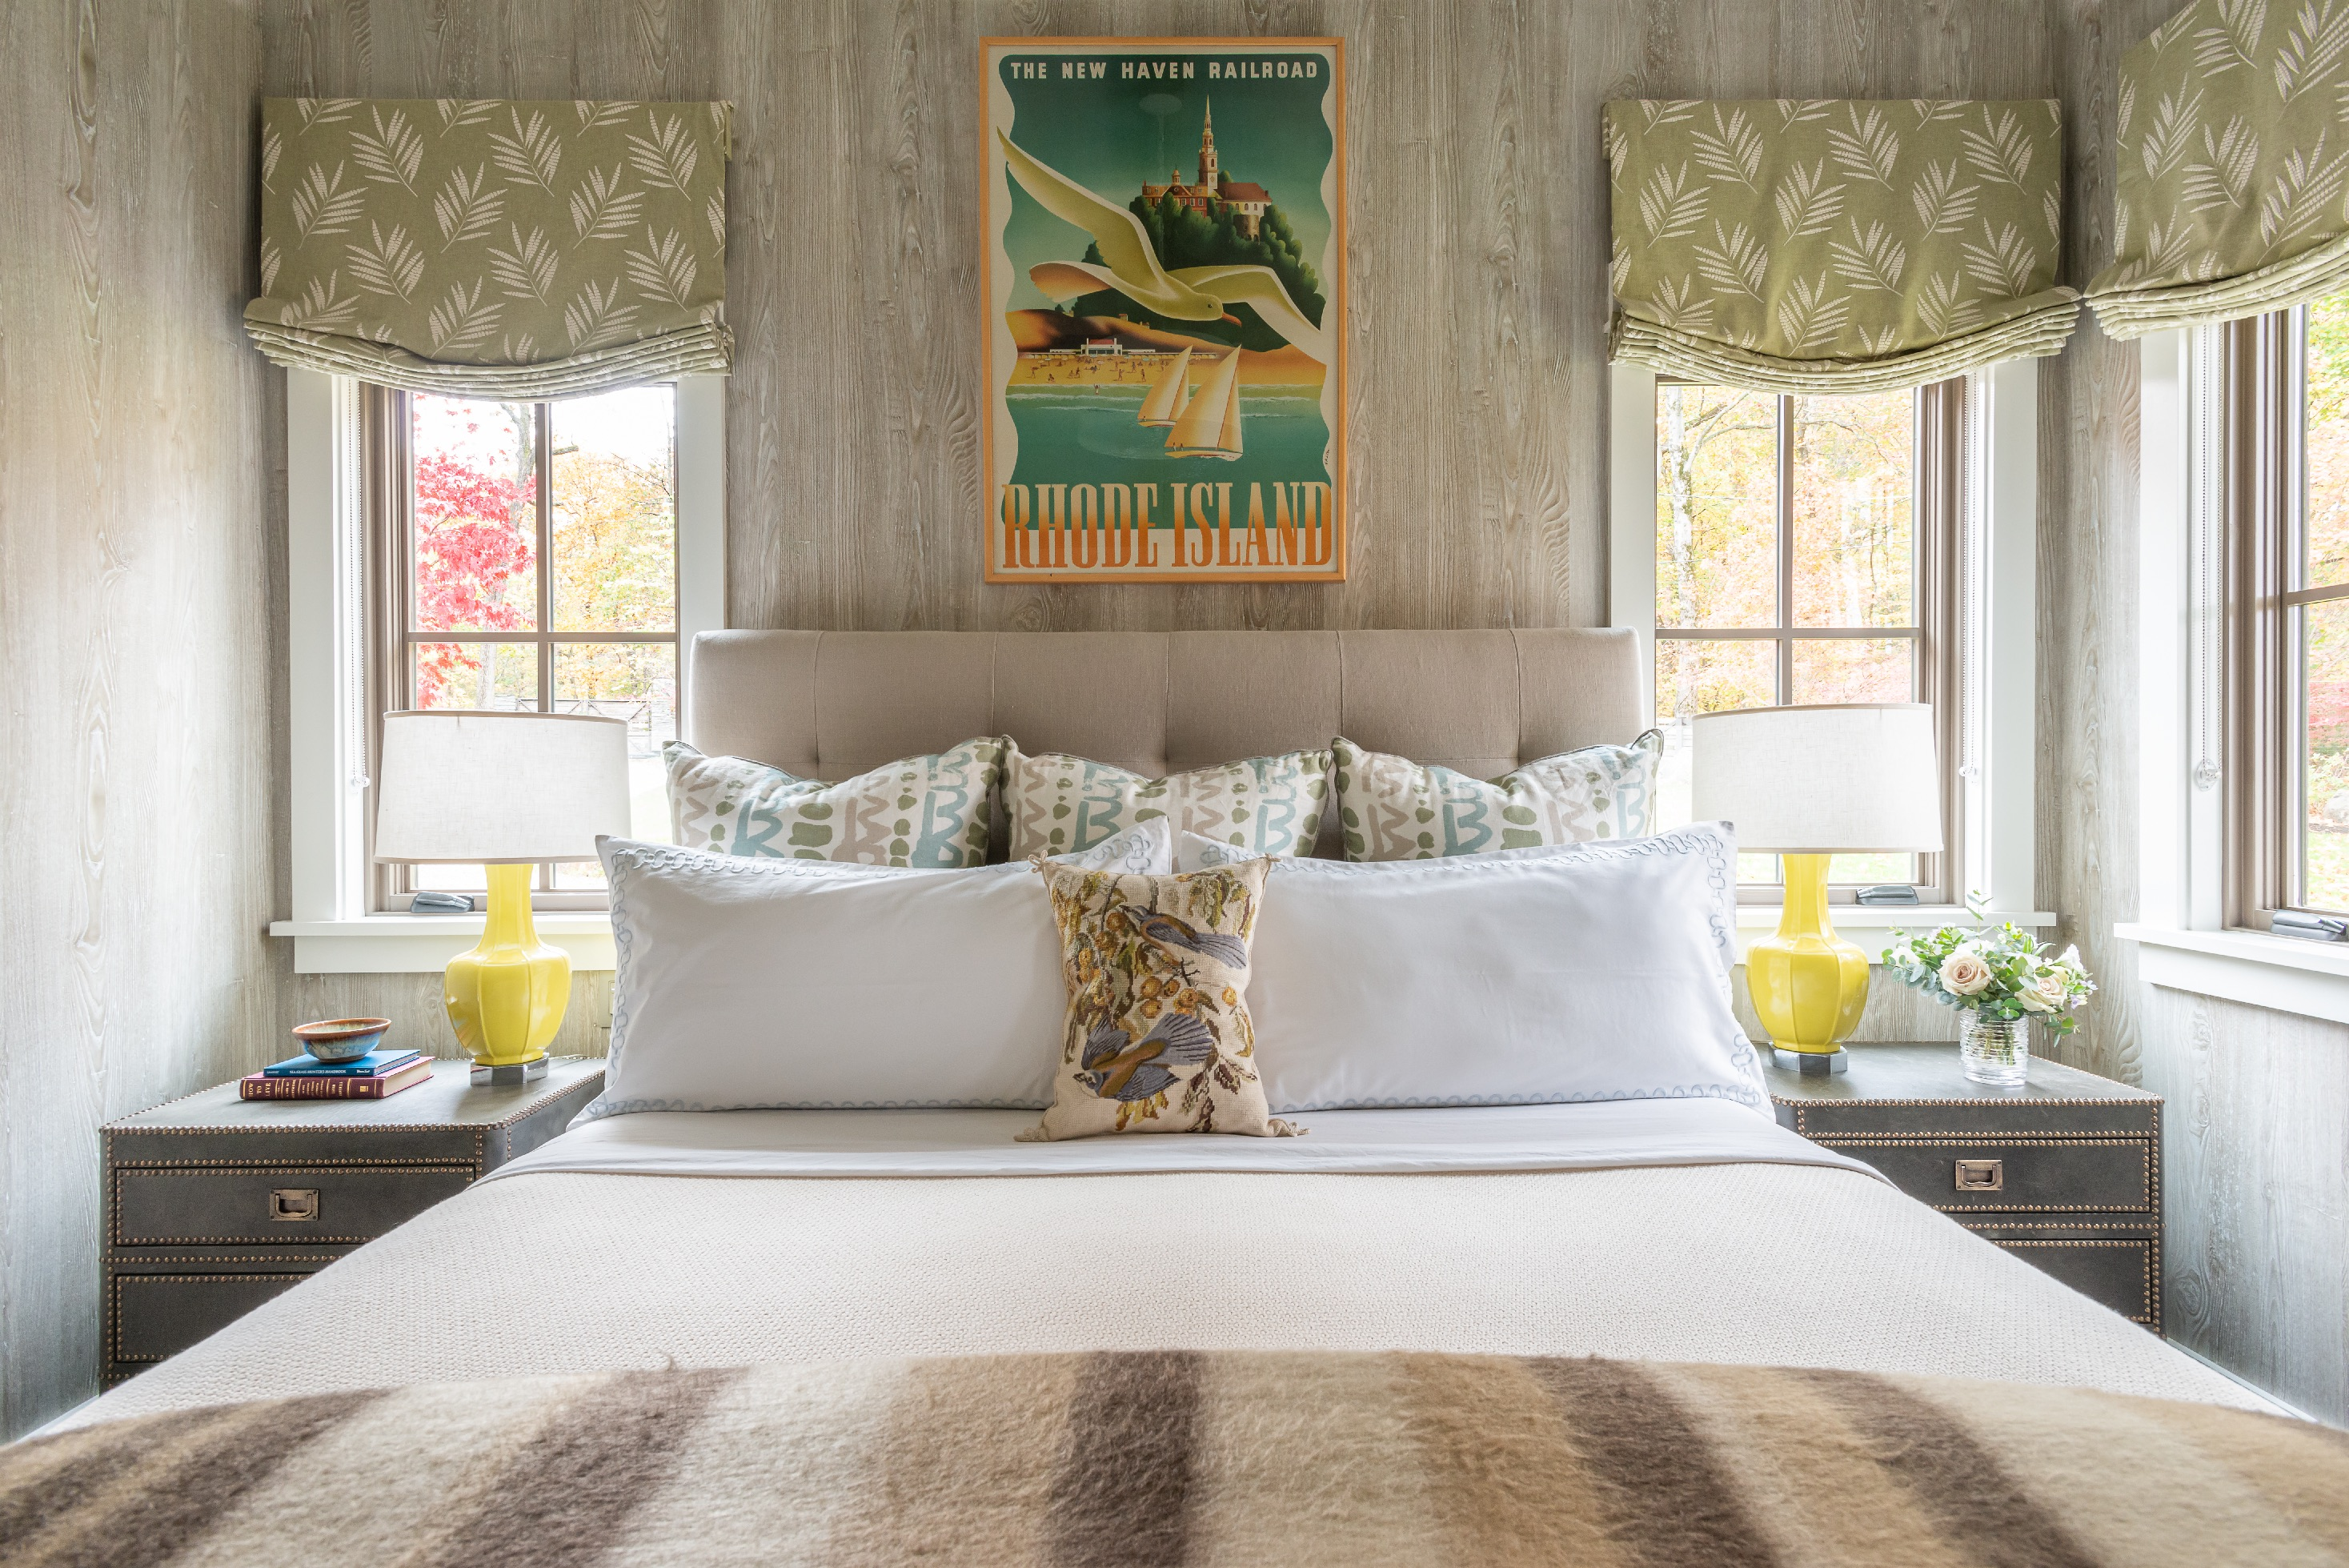  Vacation Home Bedroom. Snedens Landing Residence by Alan Tanksley, Inc..